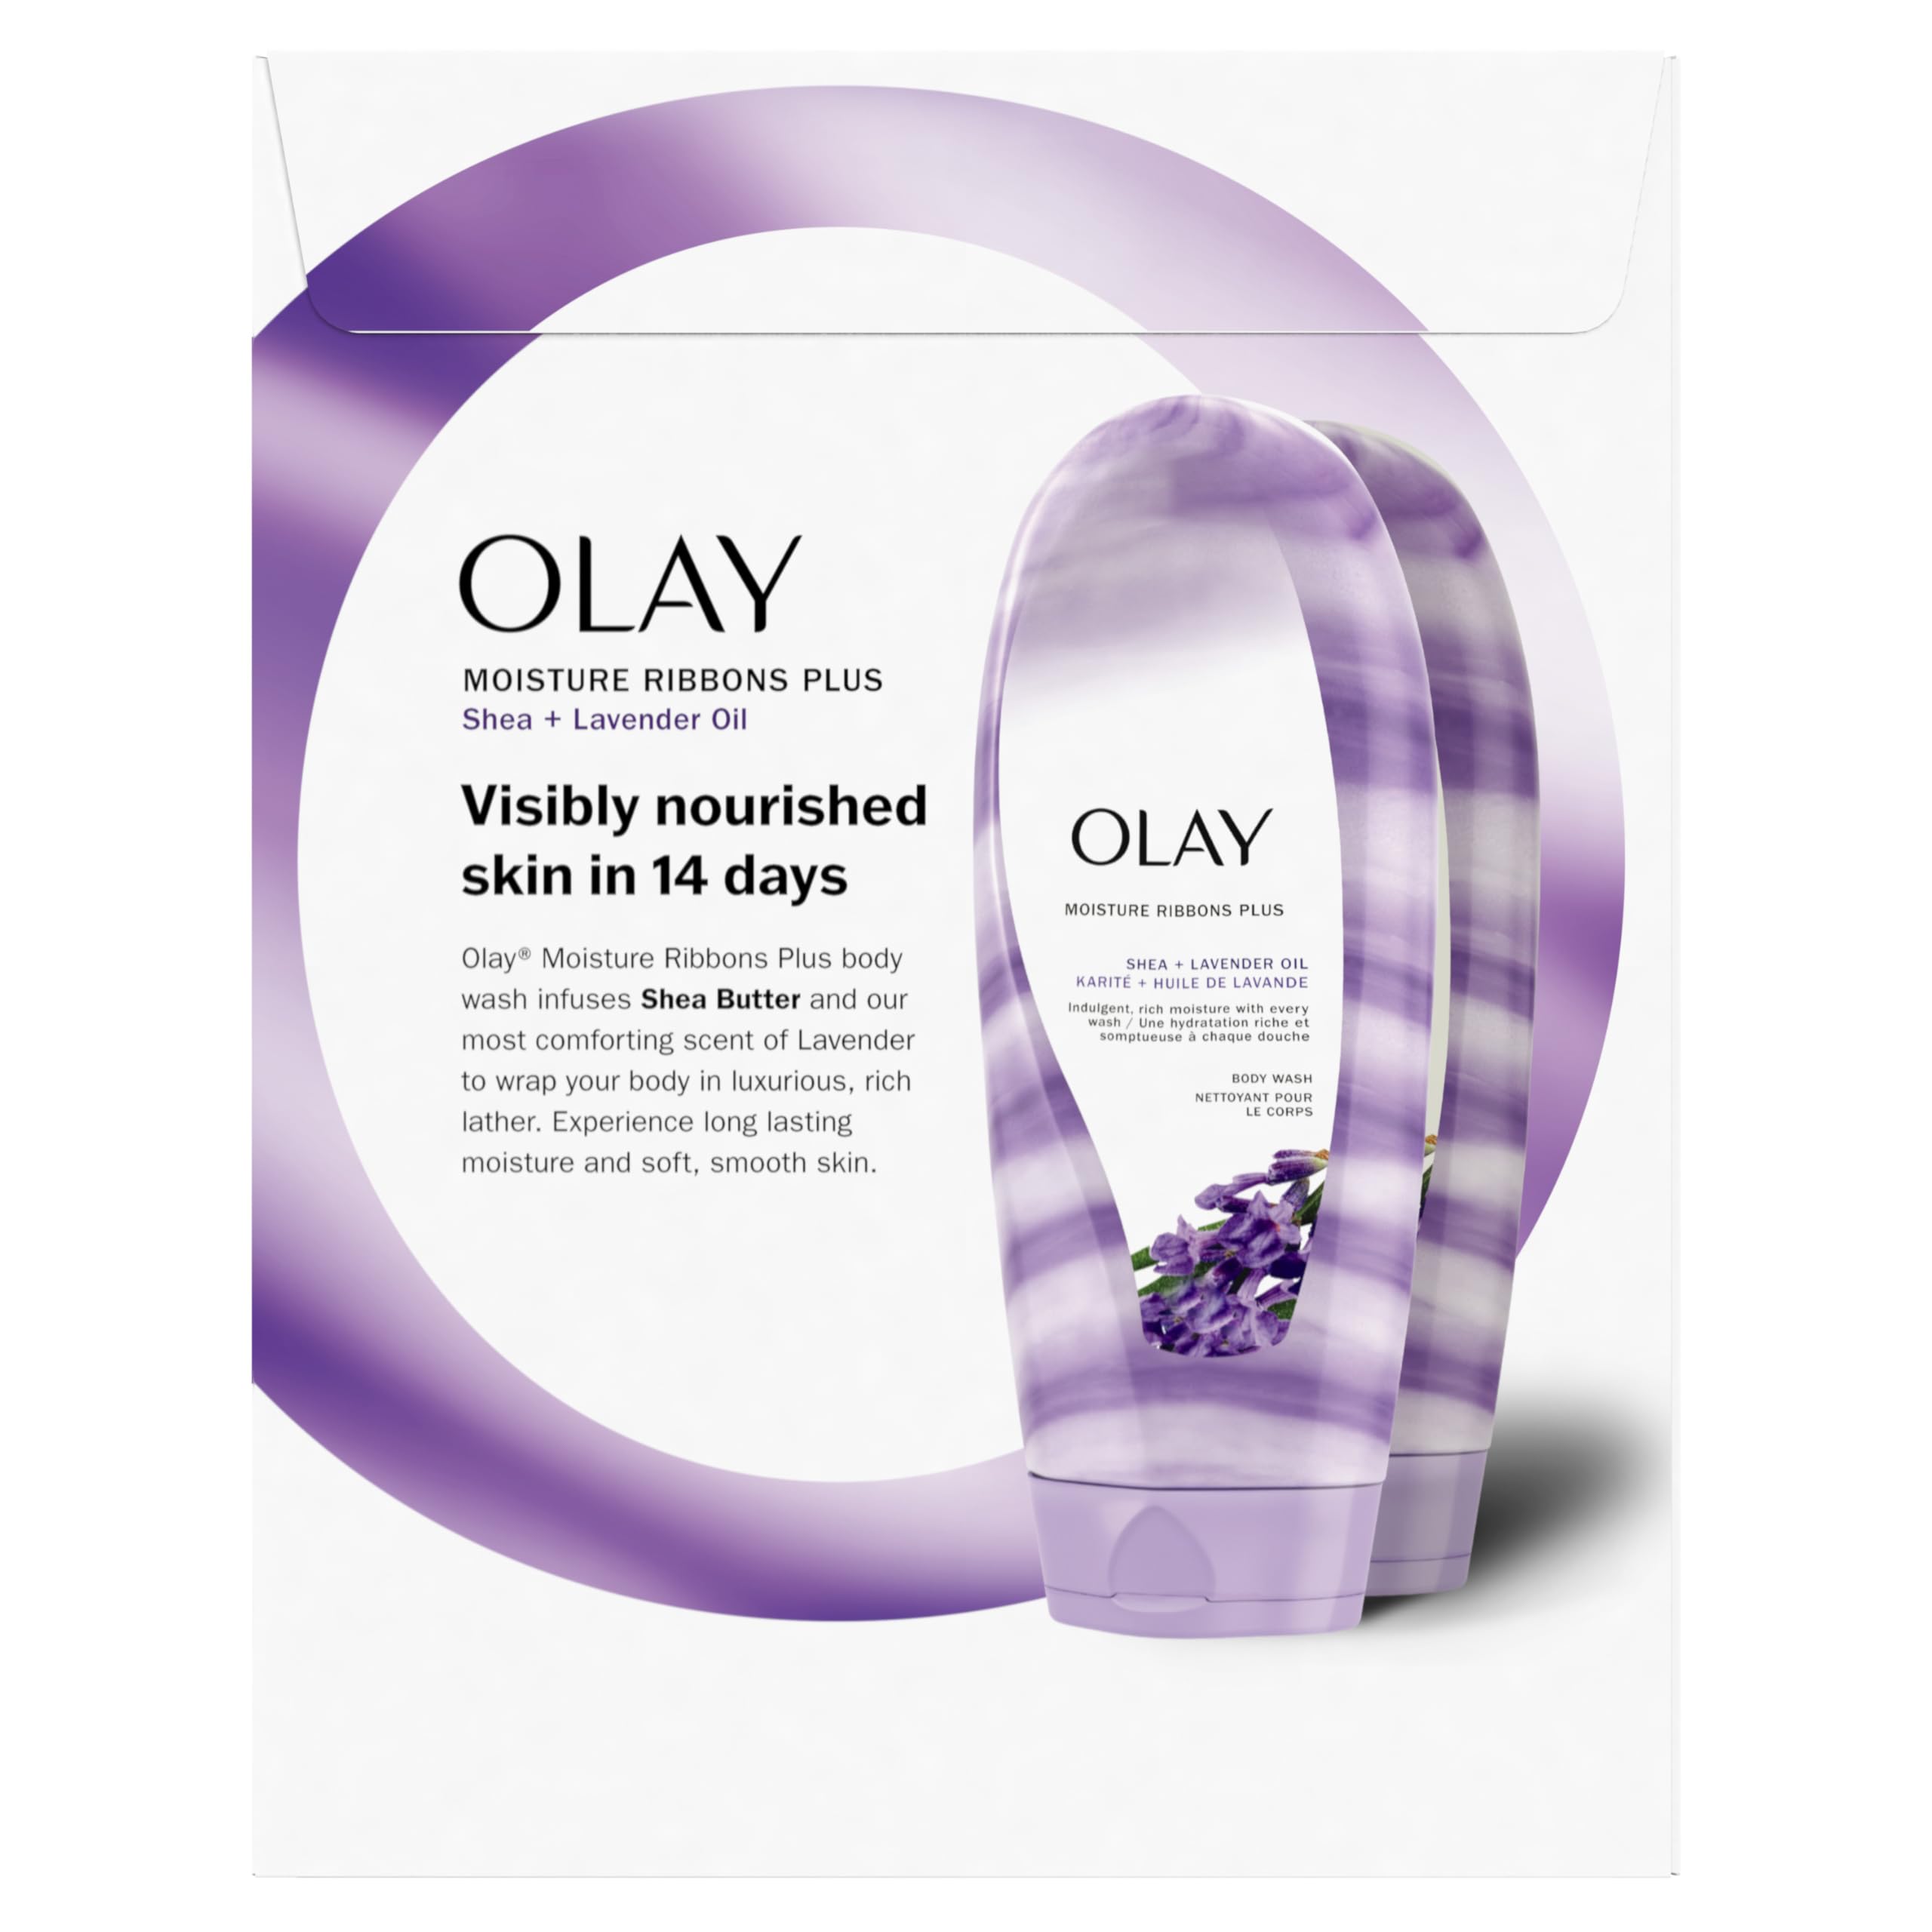 Olay Moisture Ribbons Plus Shea + Lavender Oil Body Wash, 18 oz, (Pack of 2)